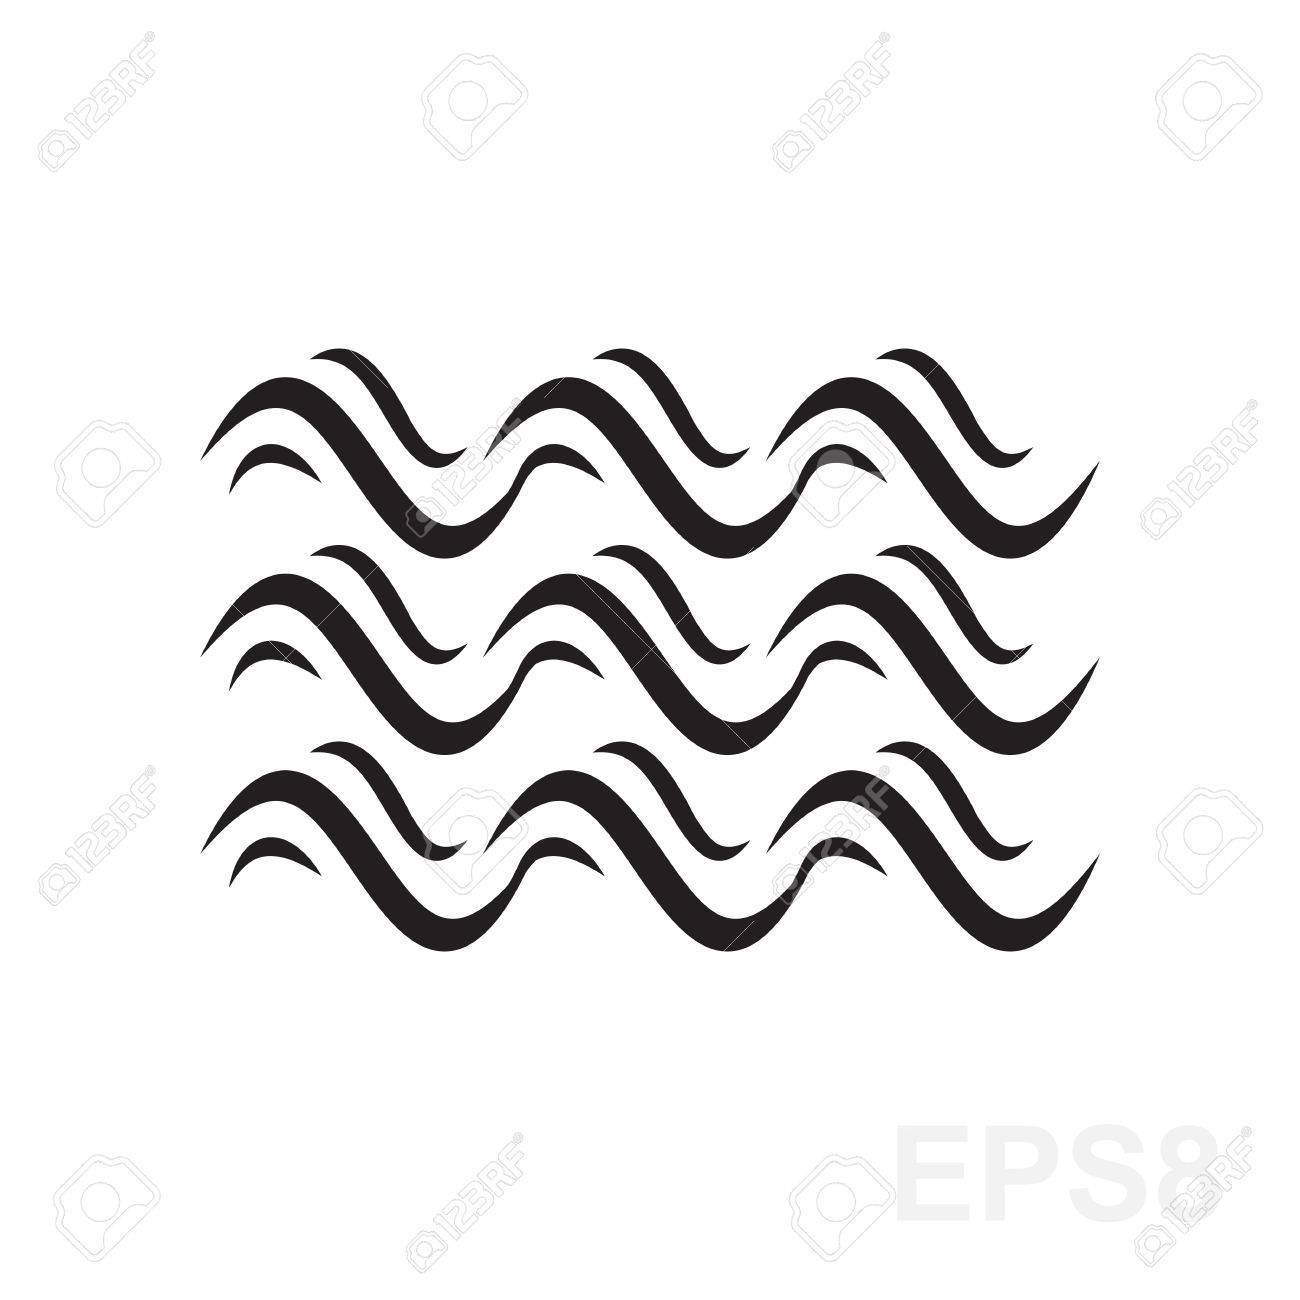 Sound wave icon - vector equalizer music element or symbol 